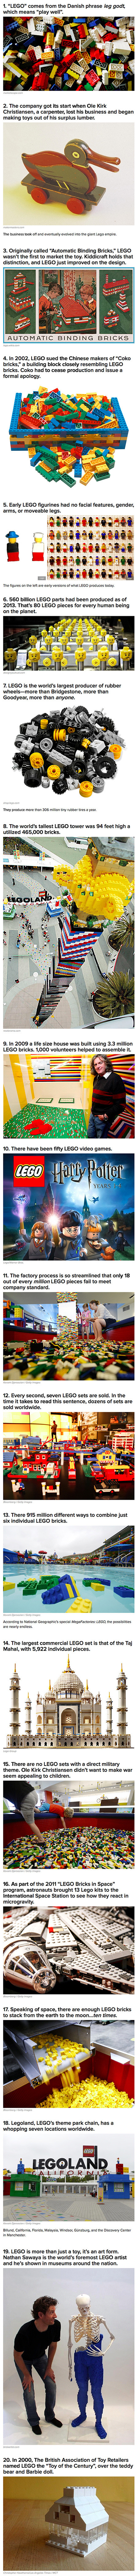 20 Fun and Interesting Facts You May Not Have Known About LEGO